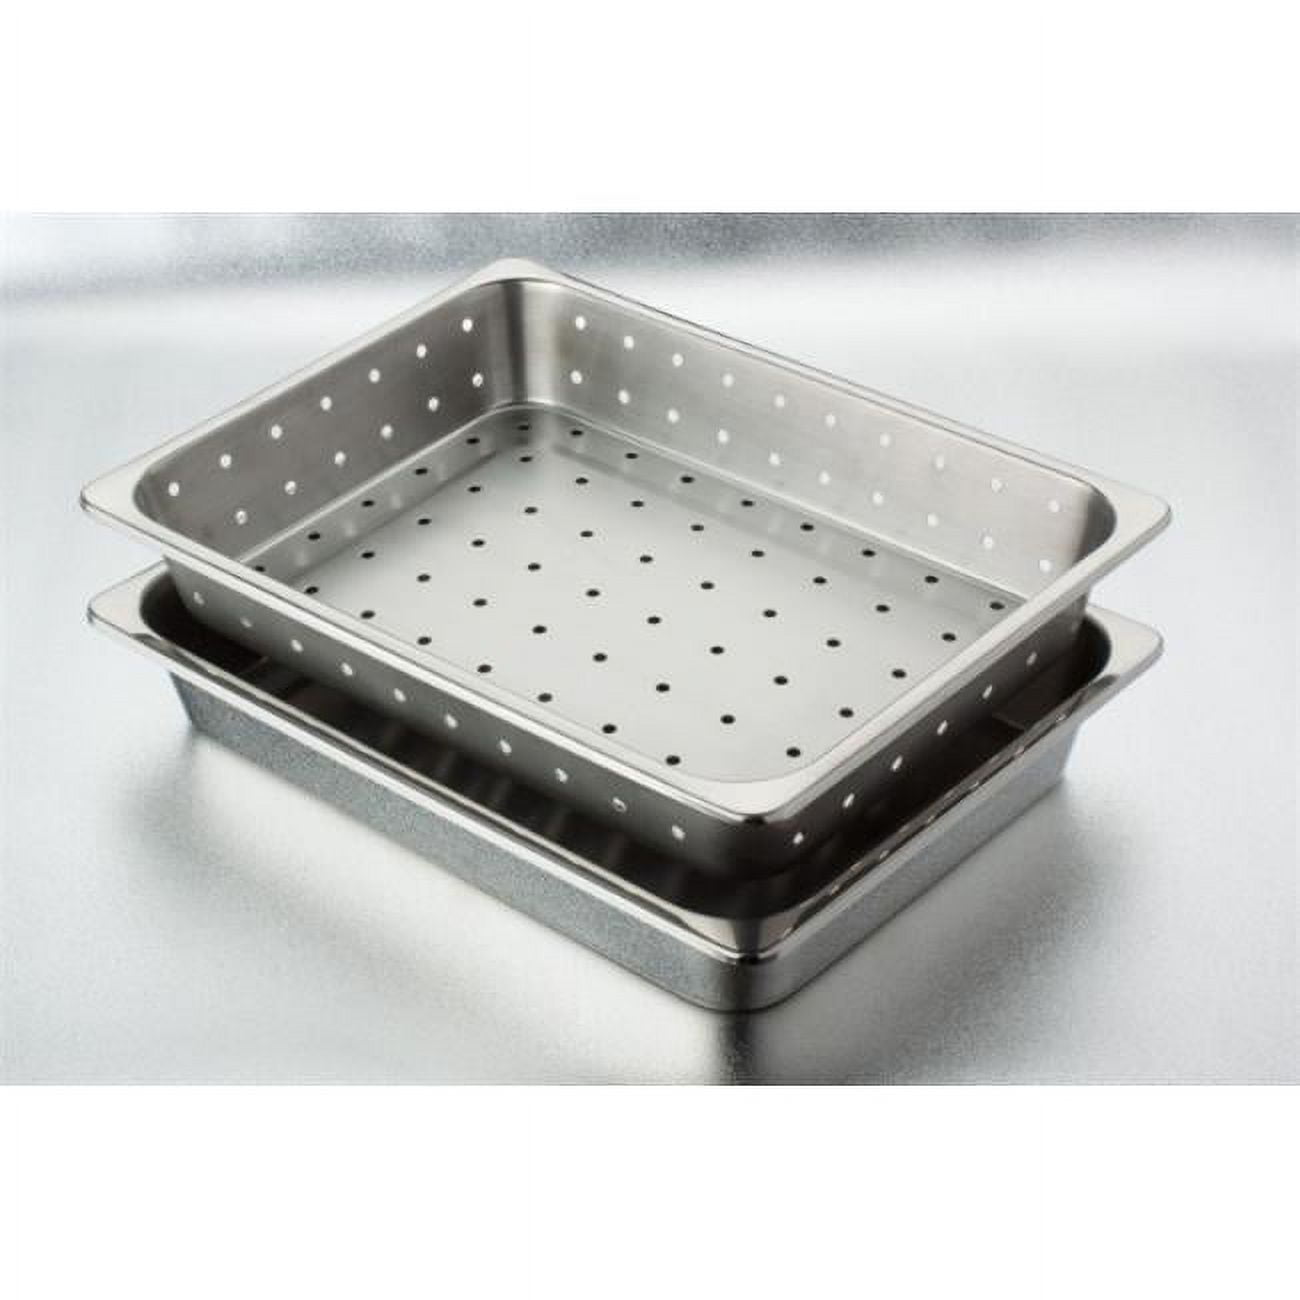 4270p Stainless Steel Perforated Insert Tray